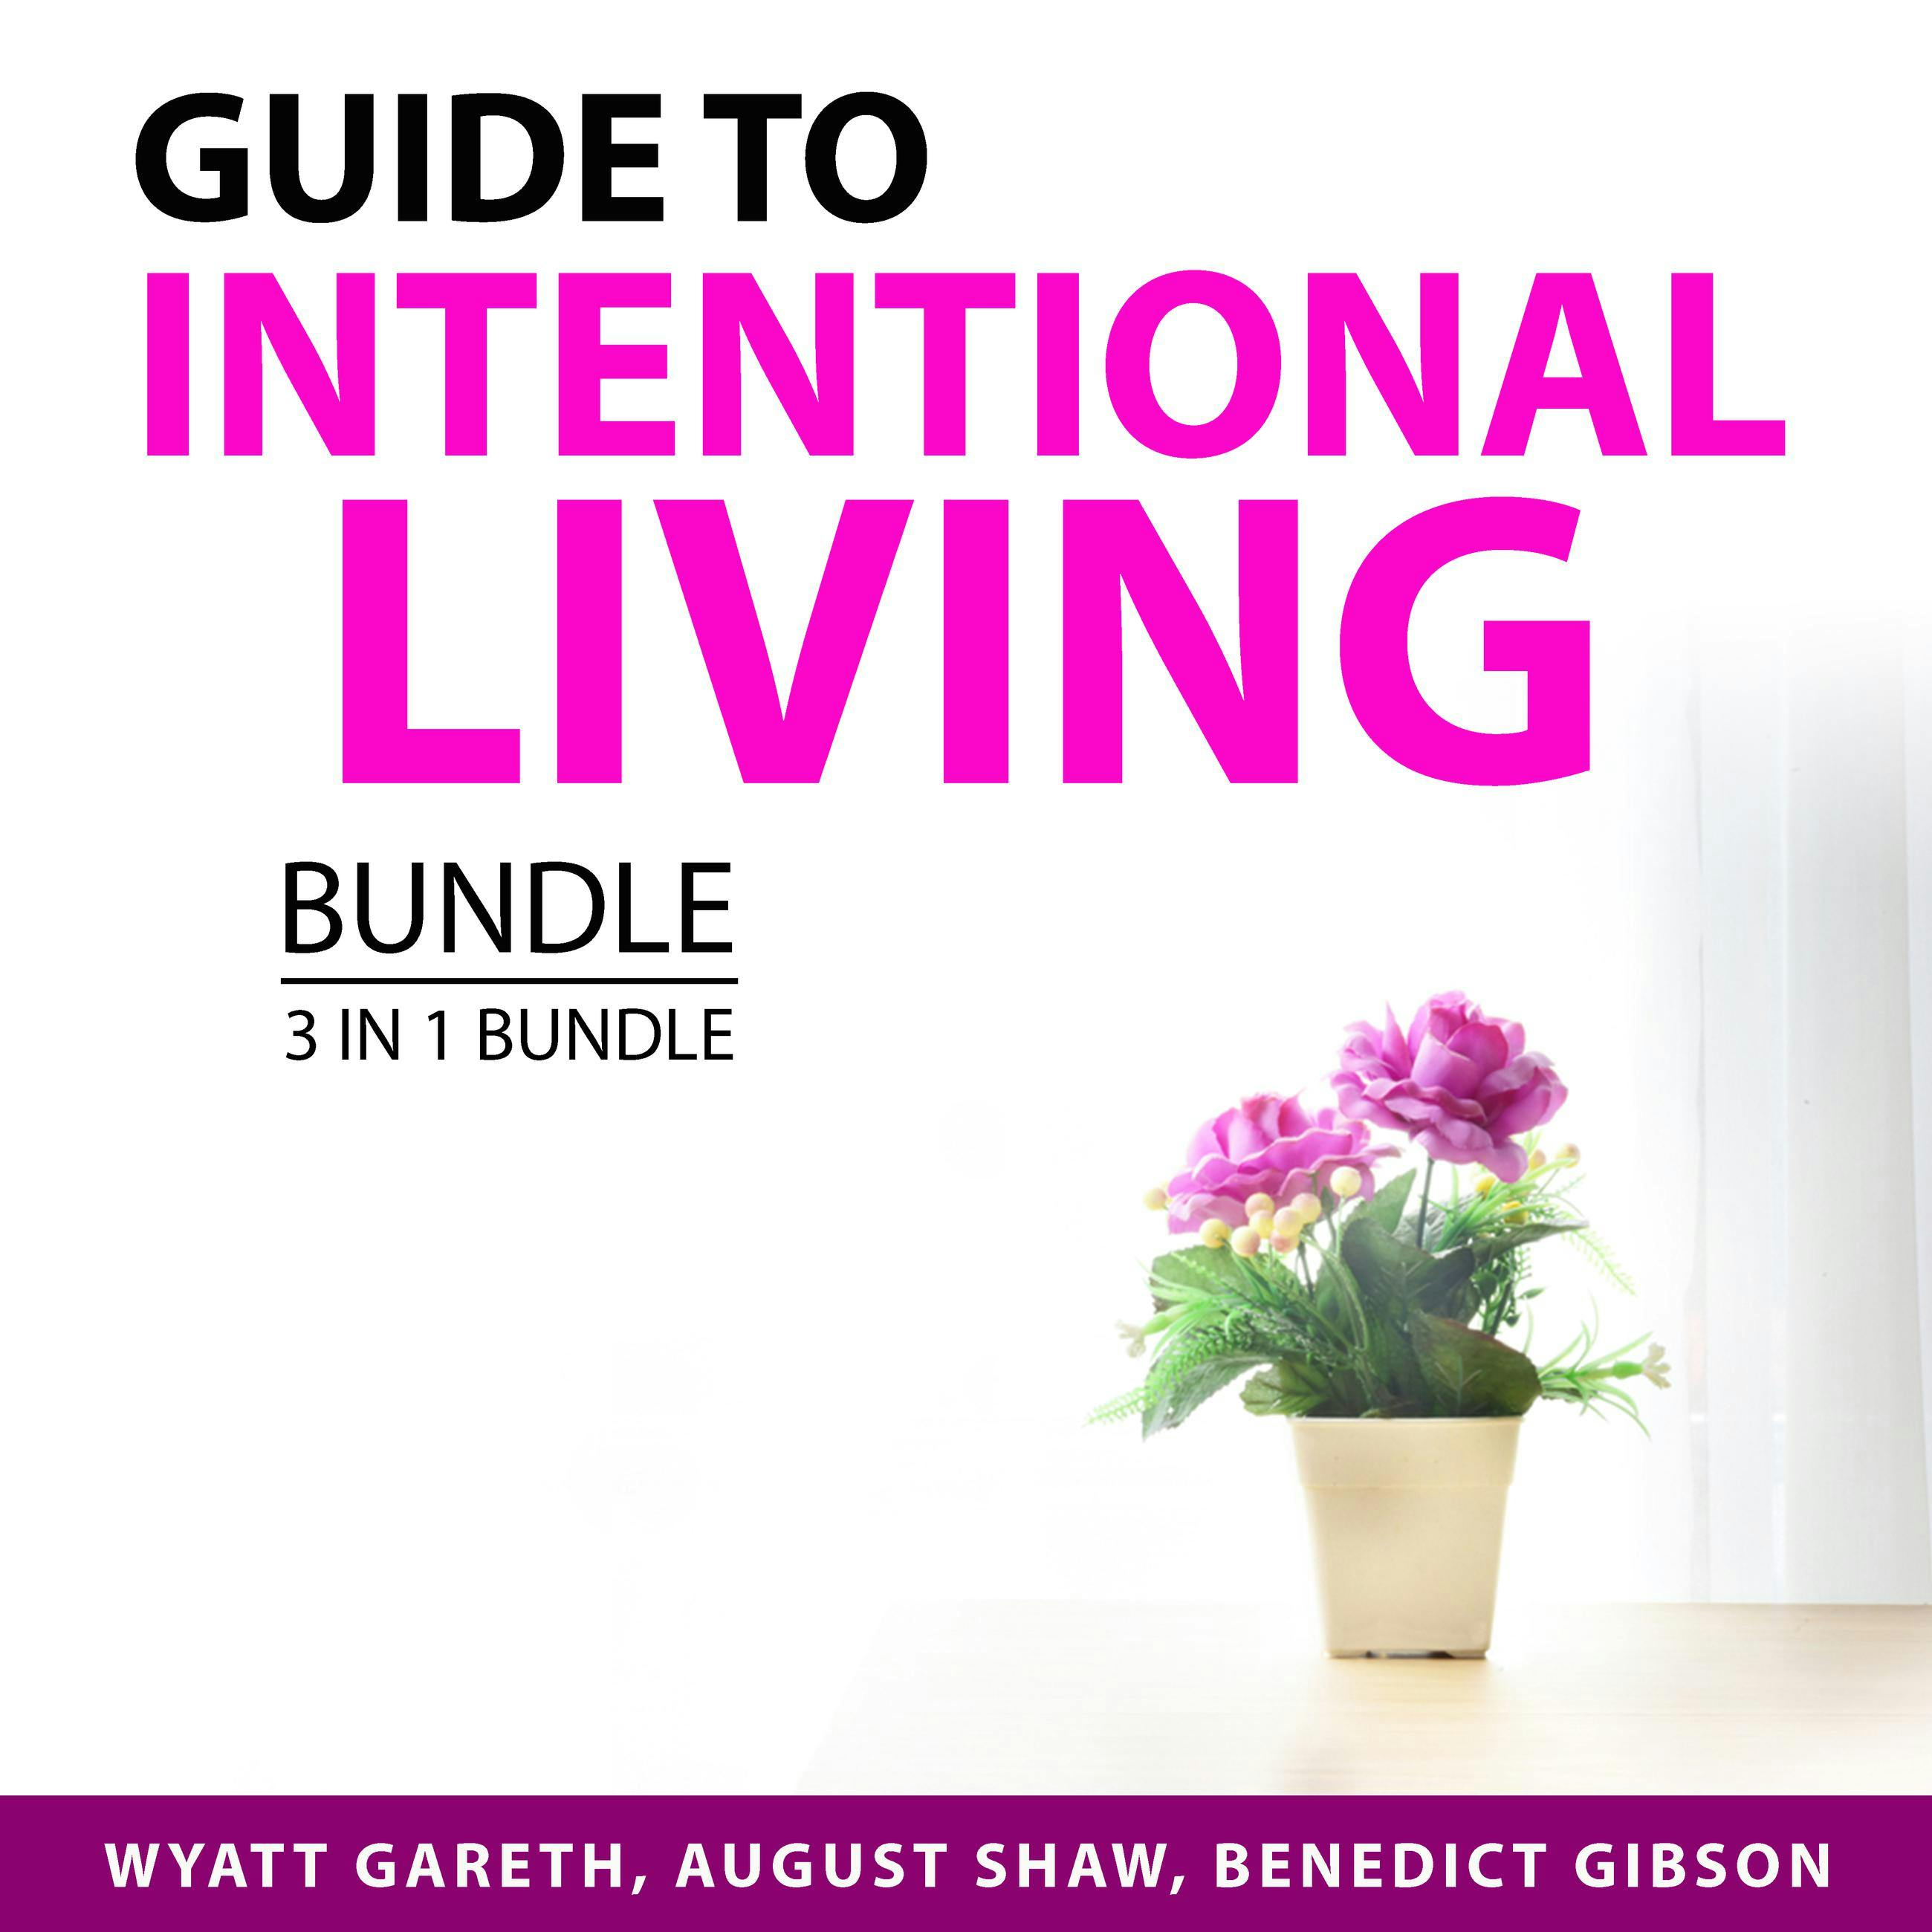 Guide to Intentional Living Bundle, 3 in 1 Bundle: Purposeful Life, Live in the Present Moment, and Living On Purpose - Wyatt Gareth, August Shaw, Benedict Gibson